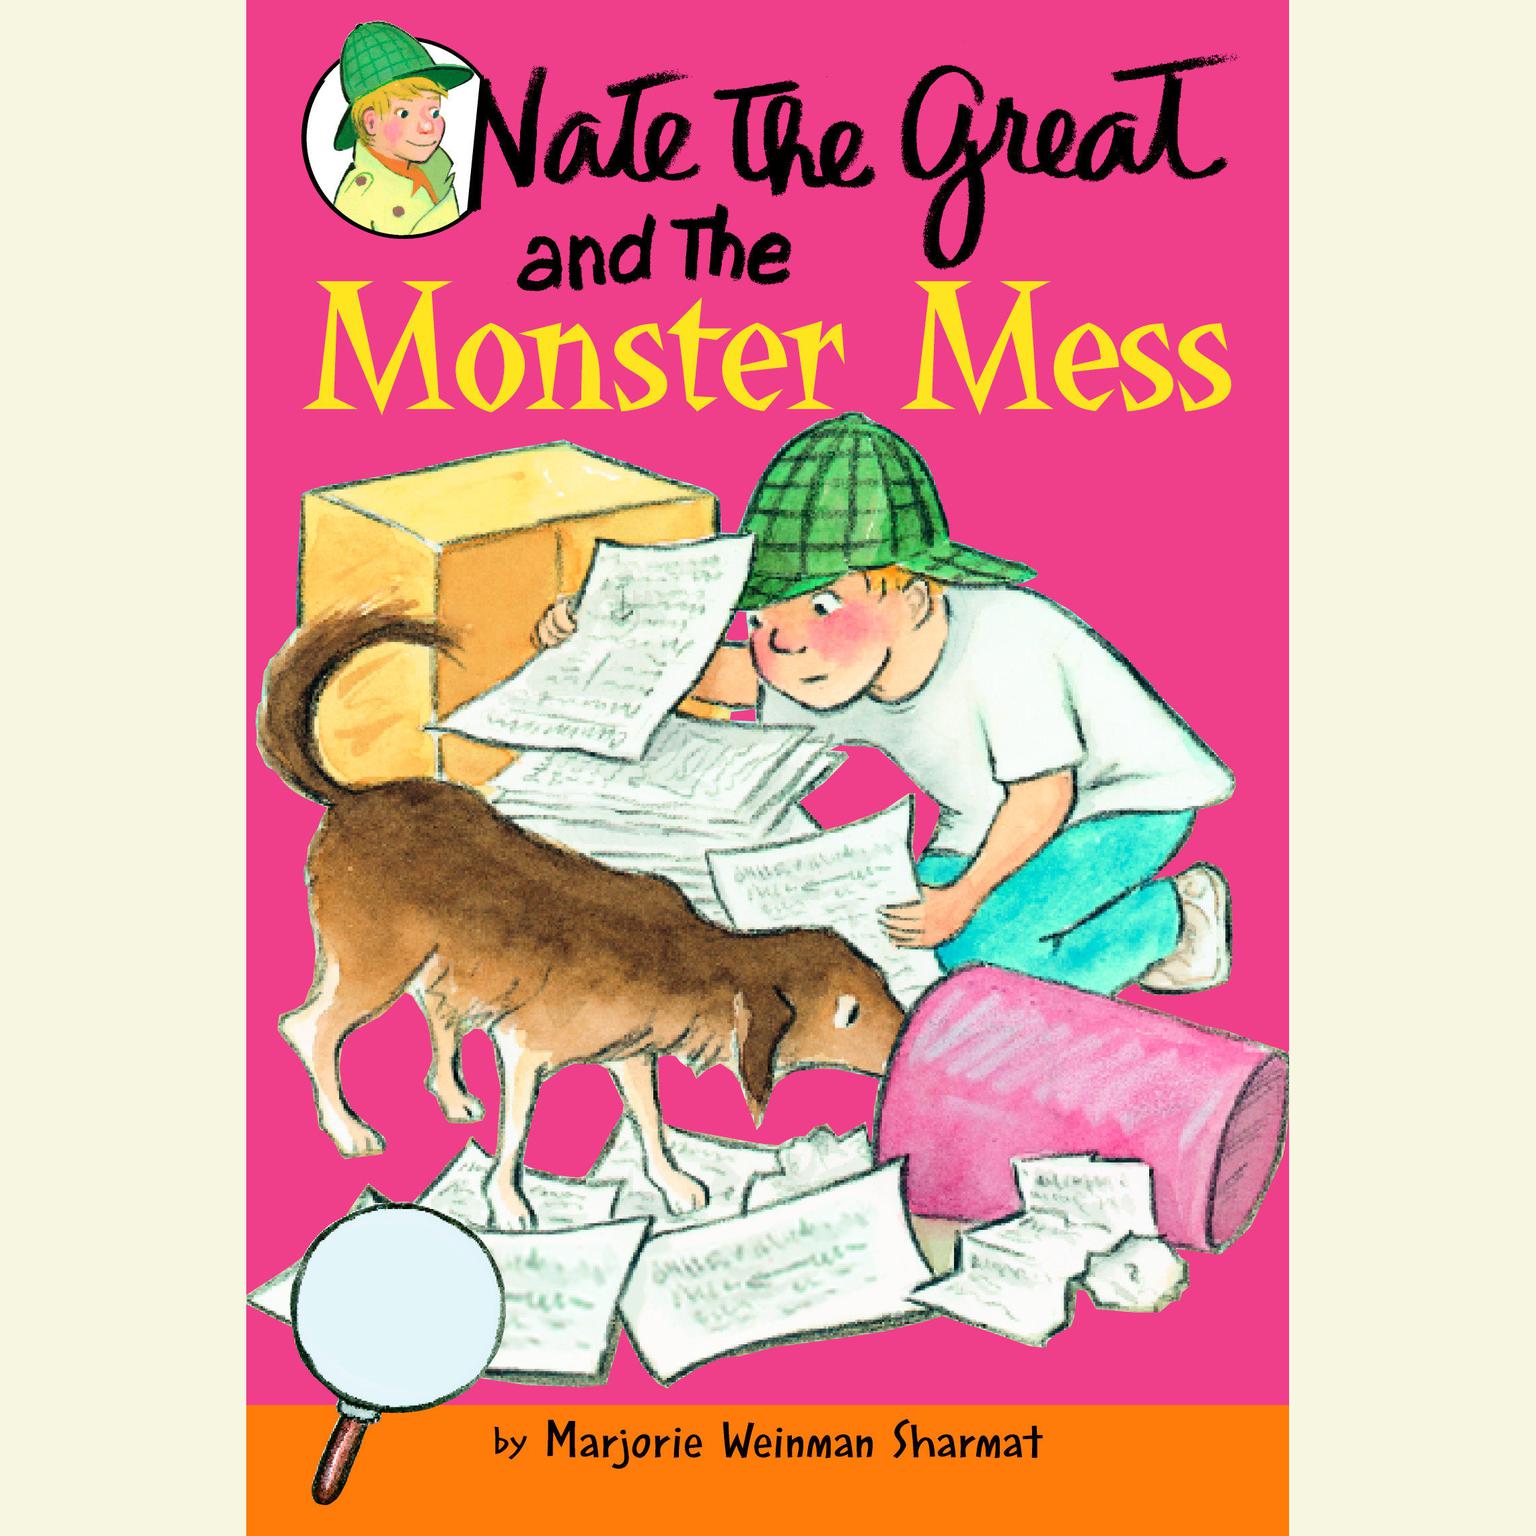 Nate the Great and the Monster Mess: Nate the Great: Favorites Audiobook, by Marjorie Weinman Sharmat